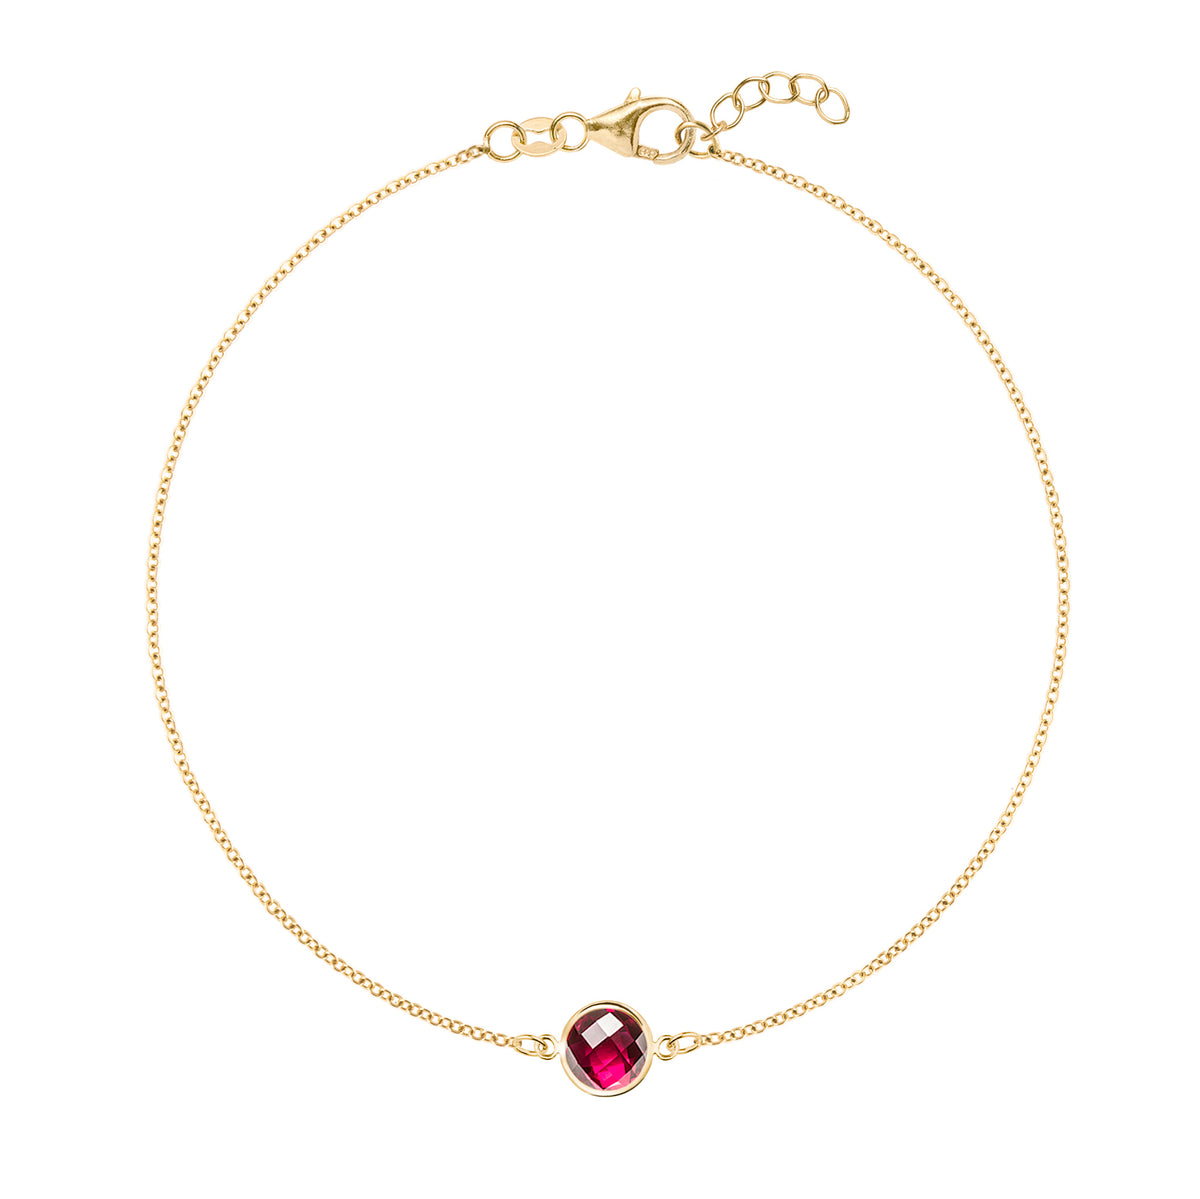 Buy Attractive 1 Gram Gold Plated Jewellery Ruby Stone Bracelet